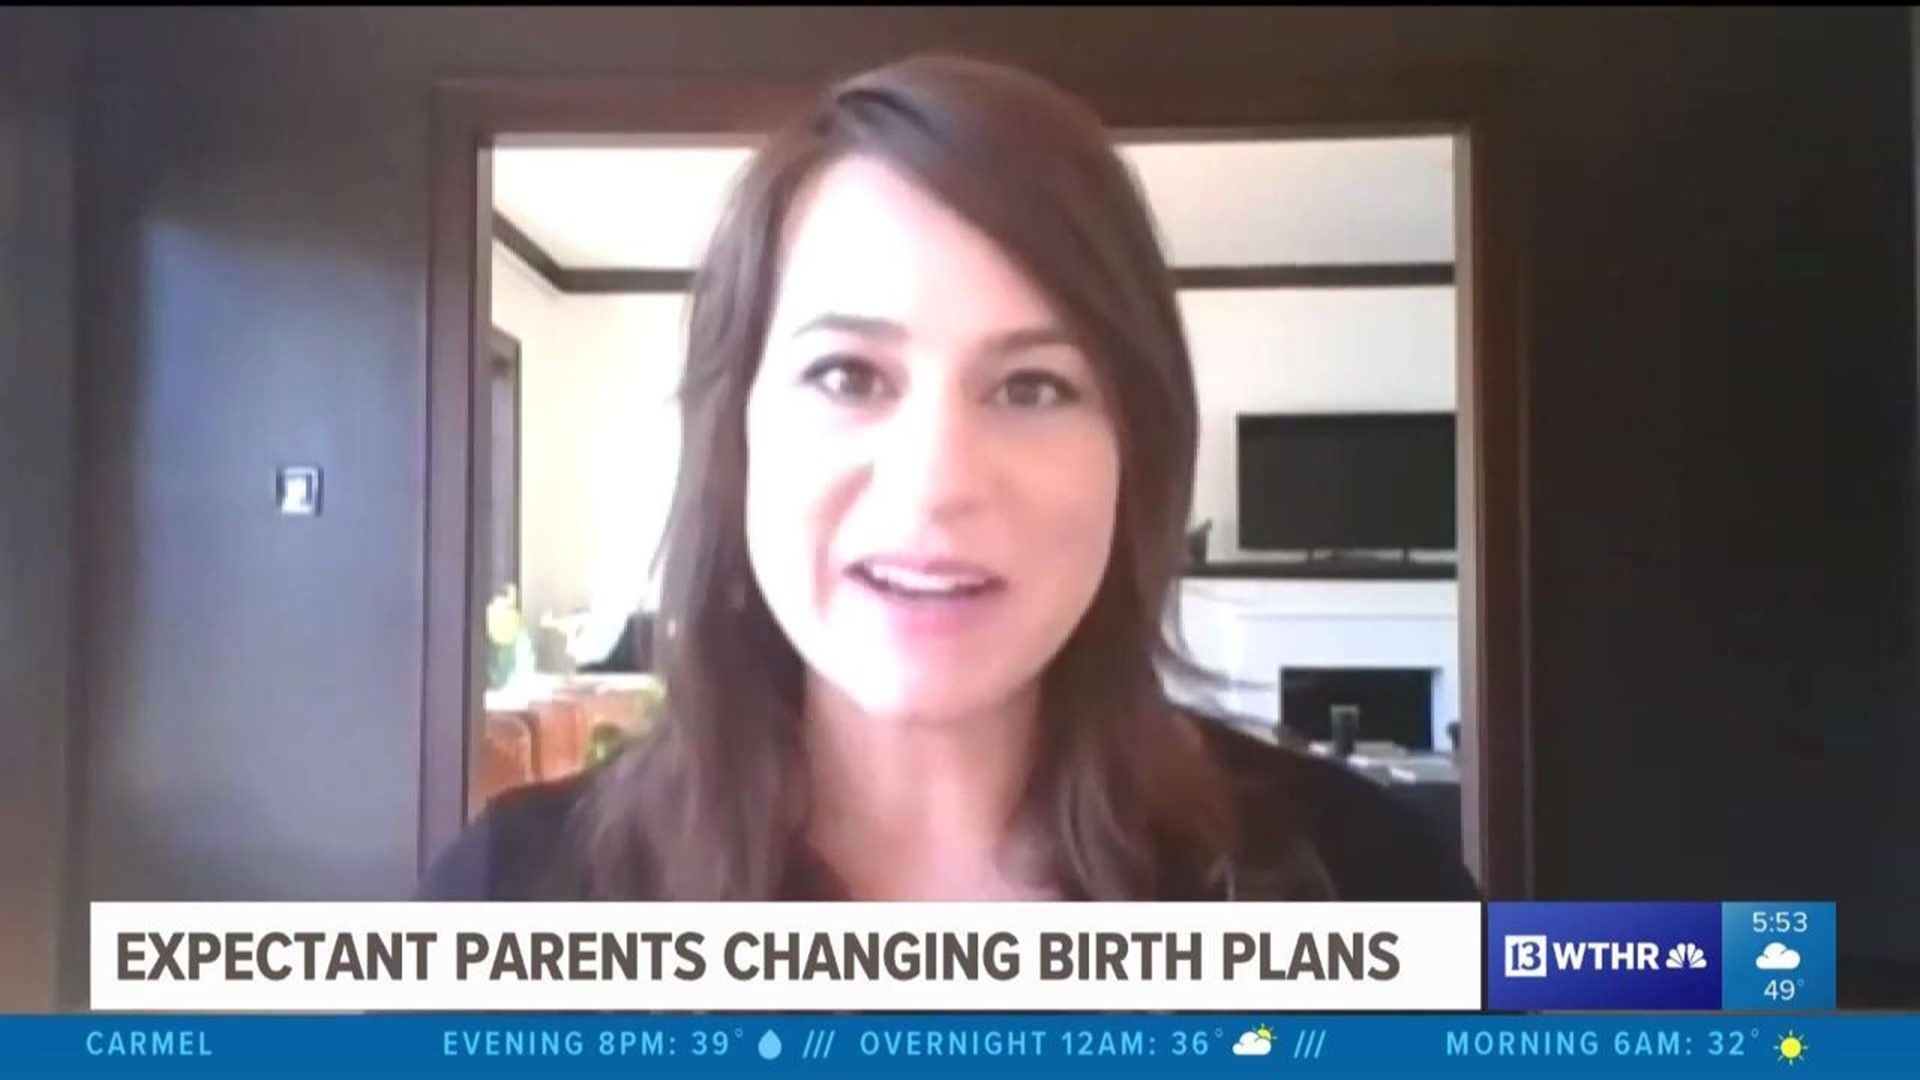 Expectant parents changing birth plans